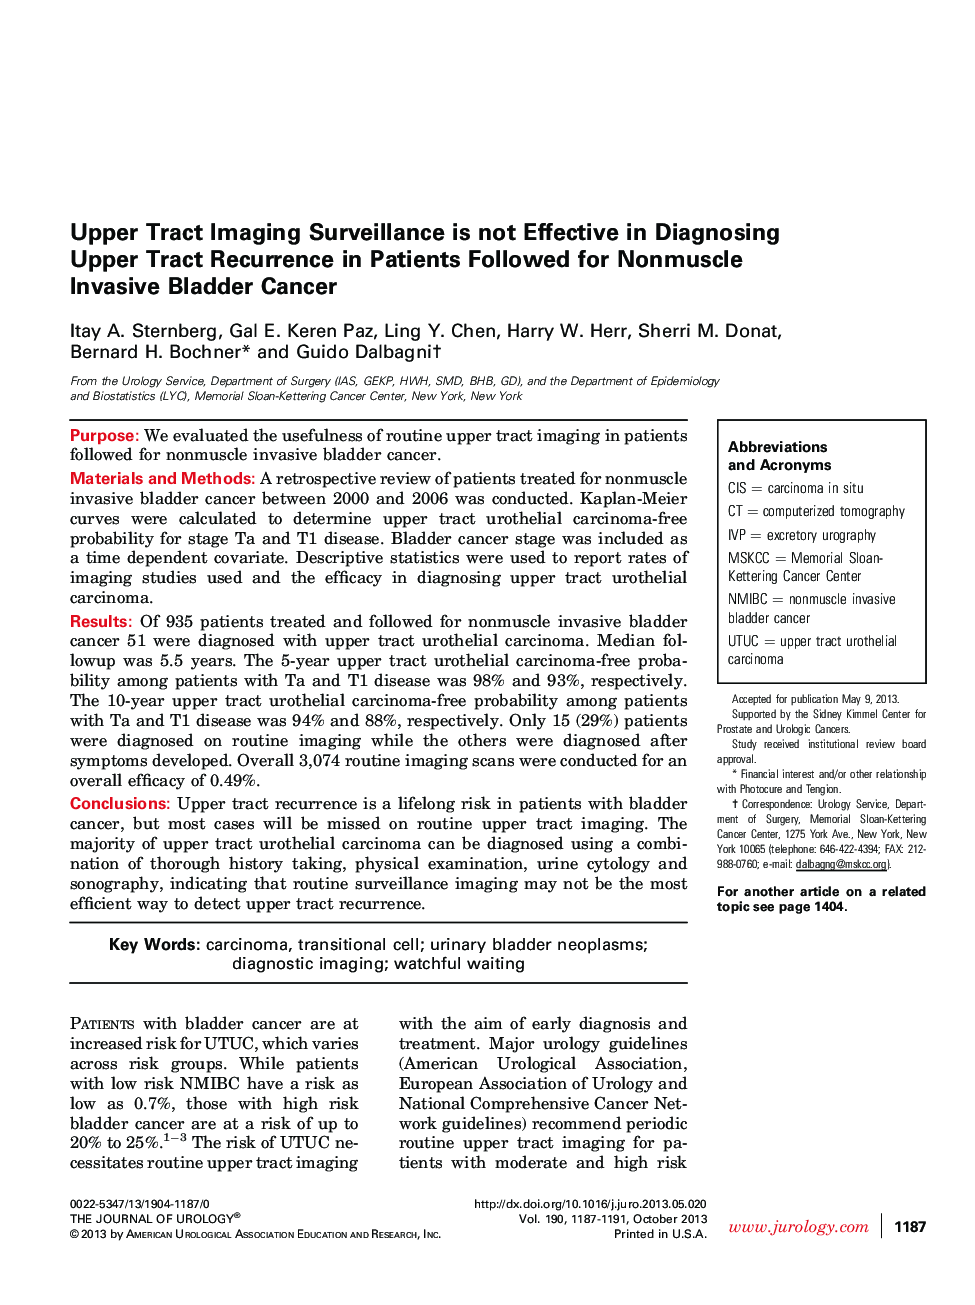 Upper Tract Imaging Surveillance is not Effective in Diagnosing Upper Tract Recurrence in Patients Followed for Nonmuscle Invasive Bladder Cancer